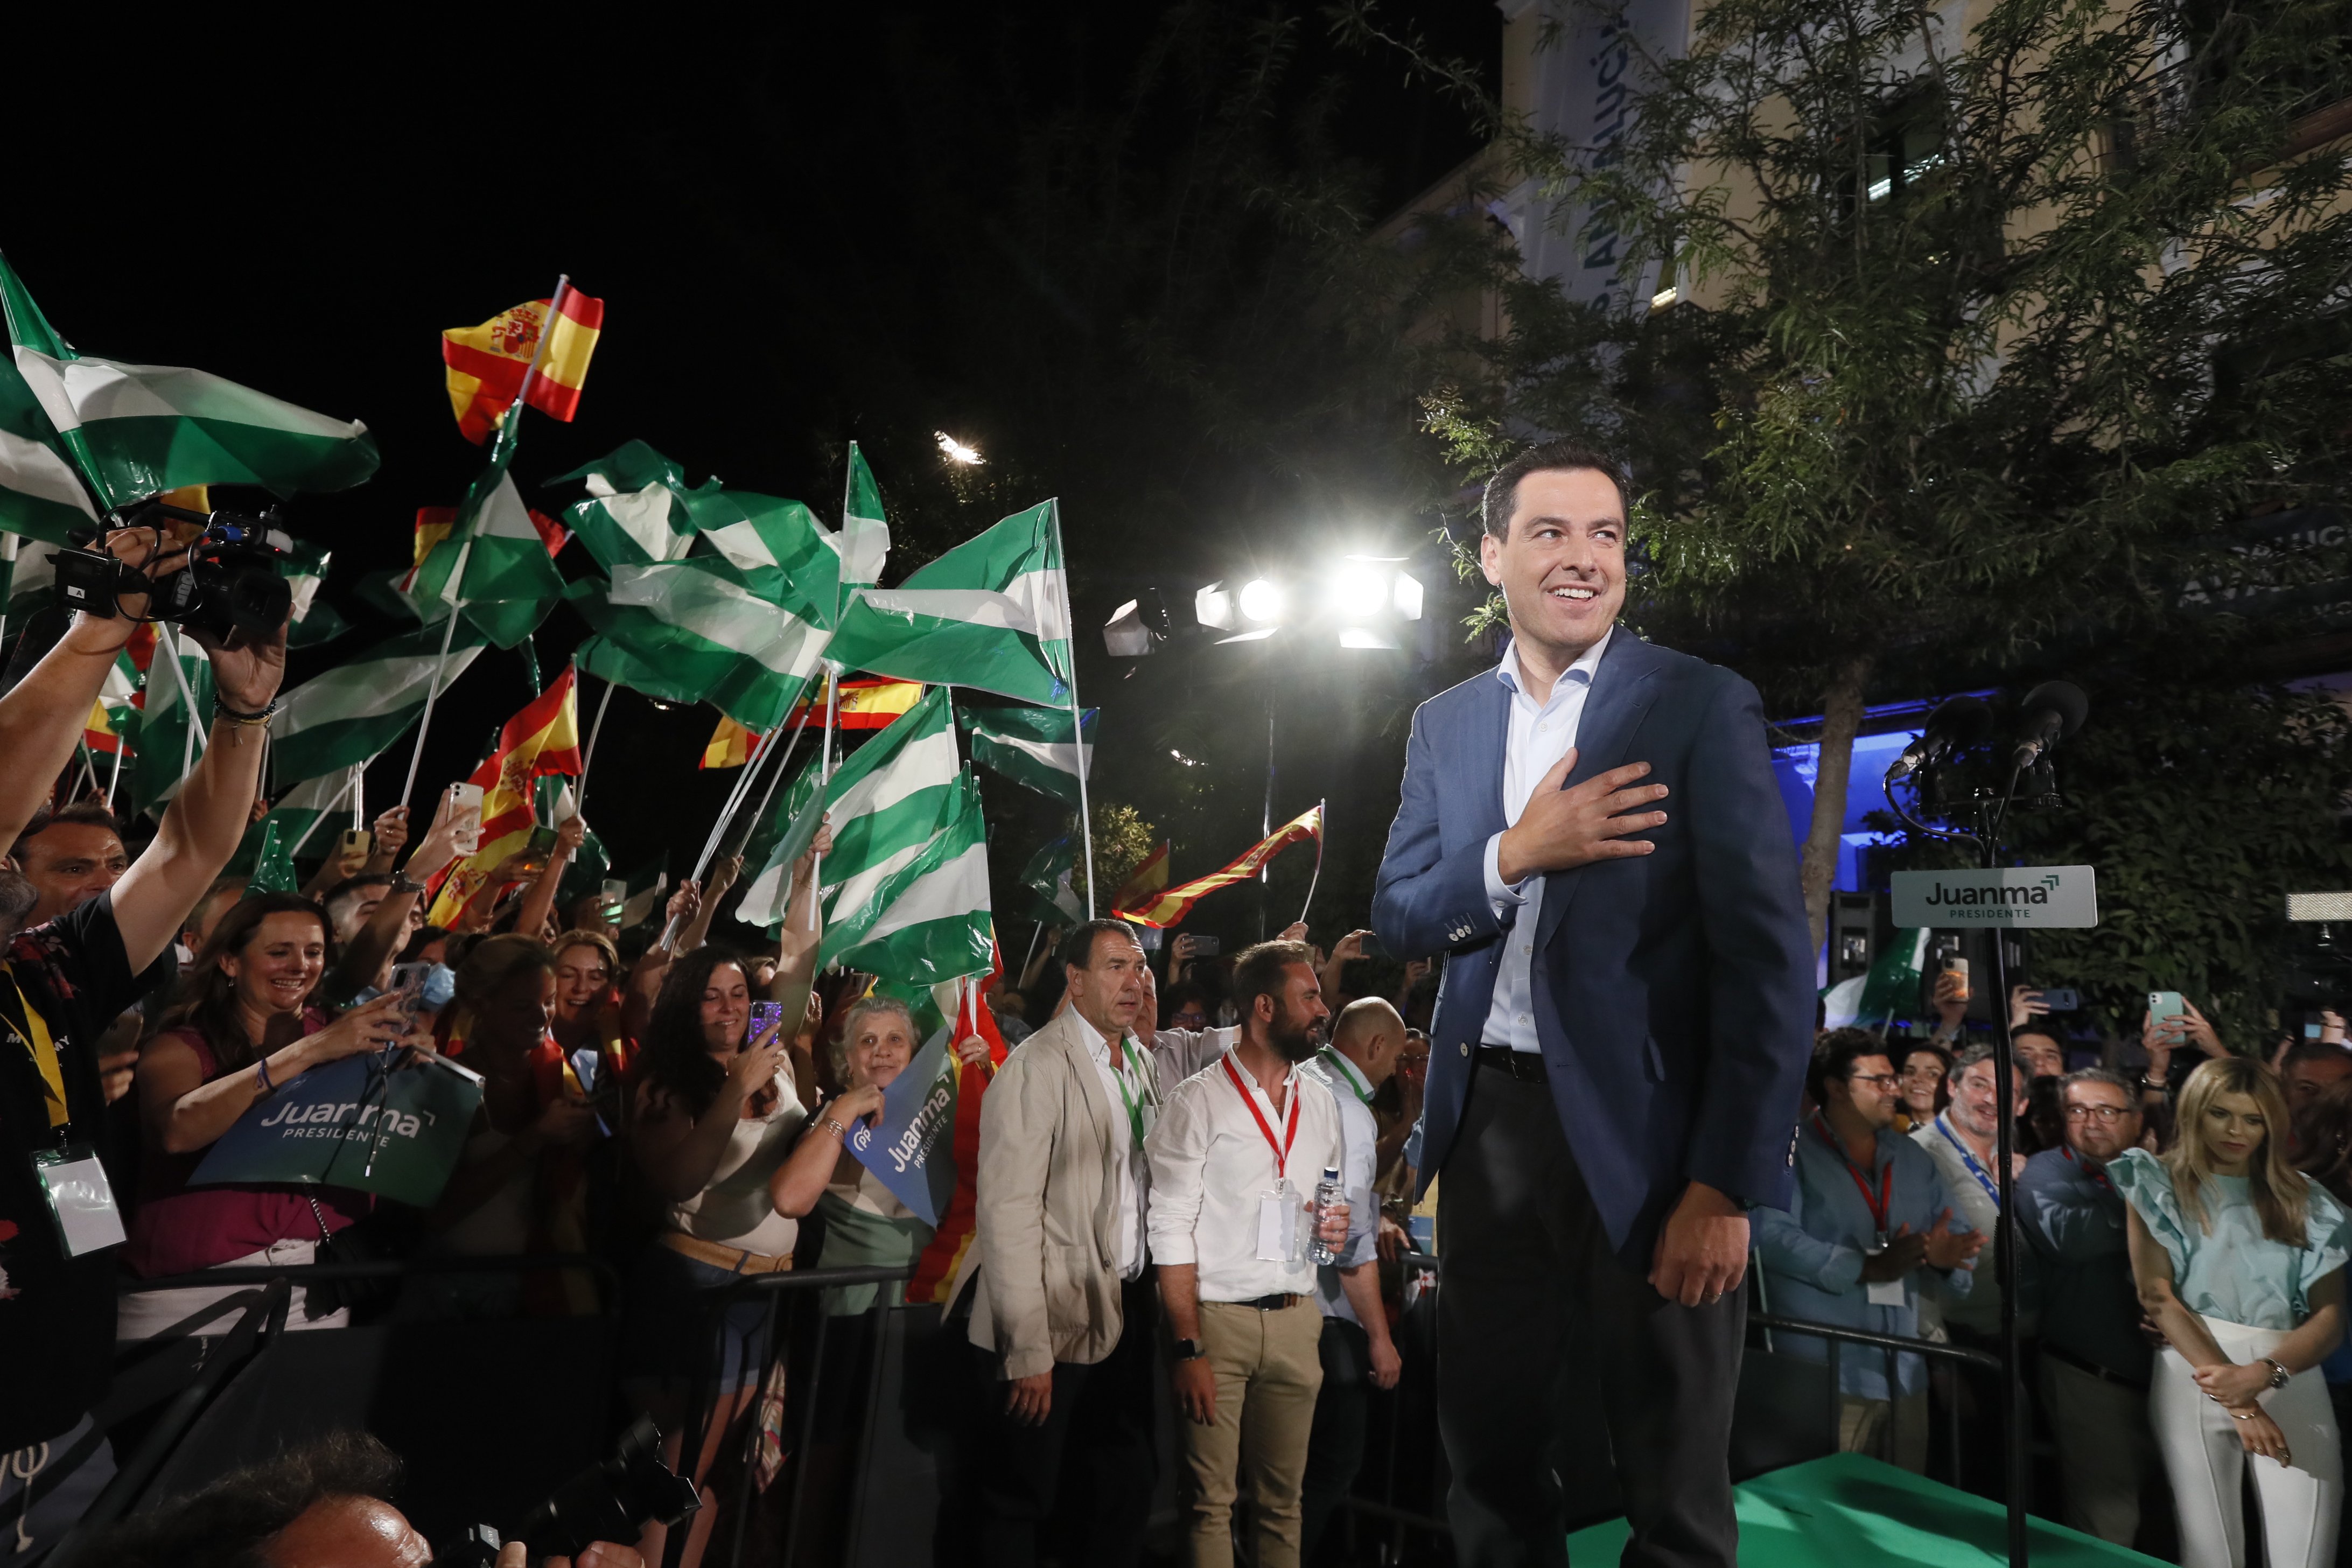 Crushing PP victory in Andalusia threatens future of Spain's Socialist-led government